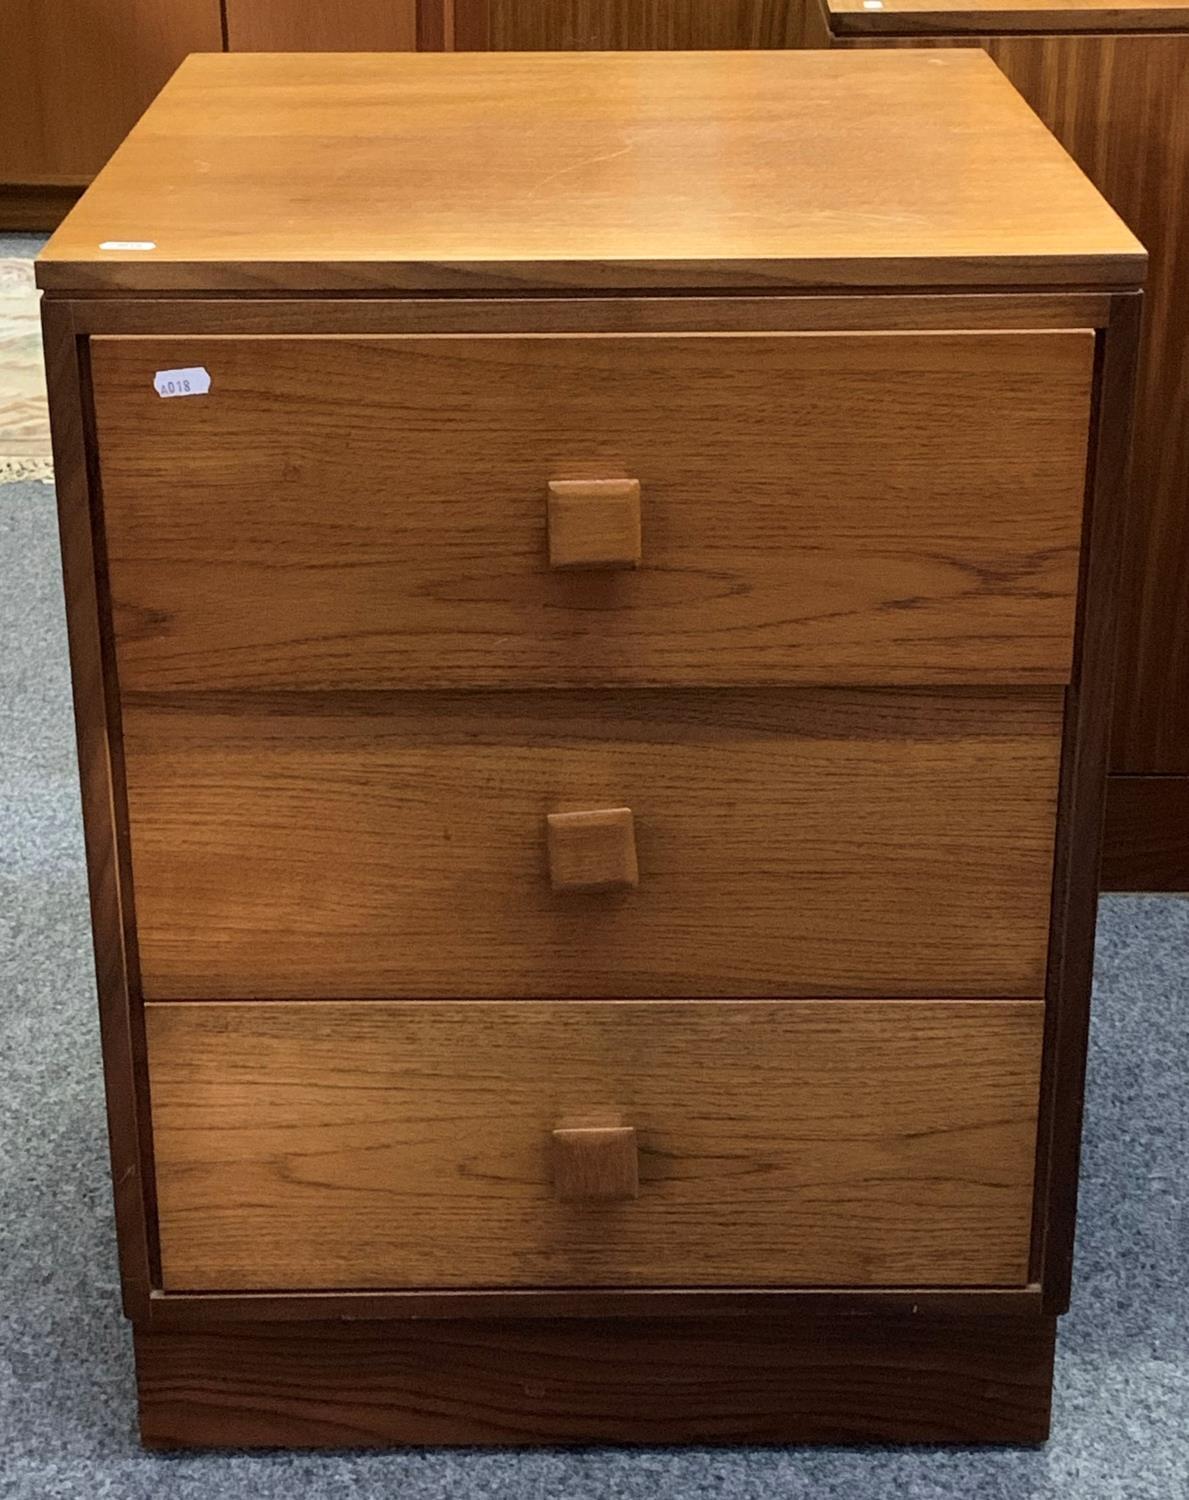 A pair of teak 3 drawer bedside chests together with a matching 3 drawer chest (3). - Image 2 of 3